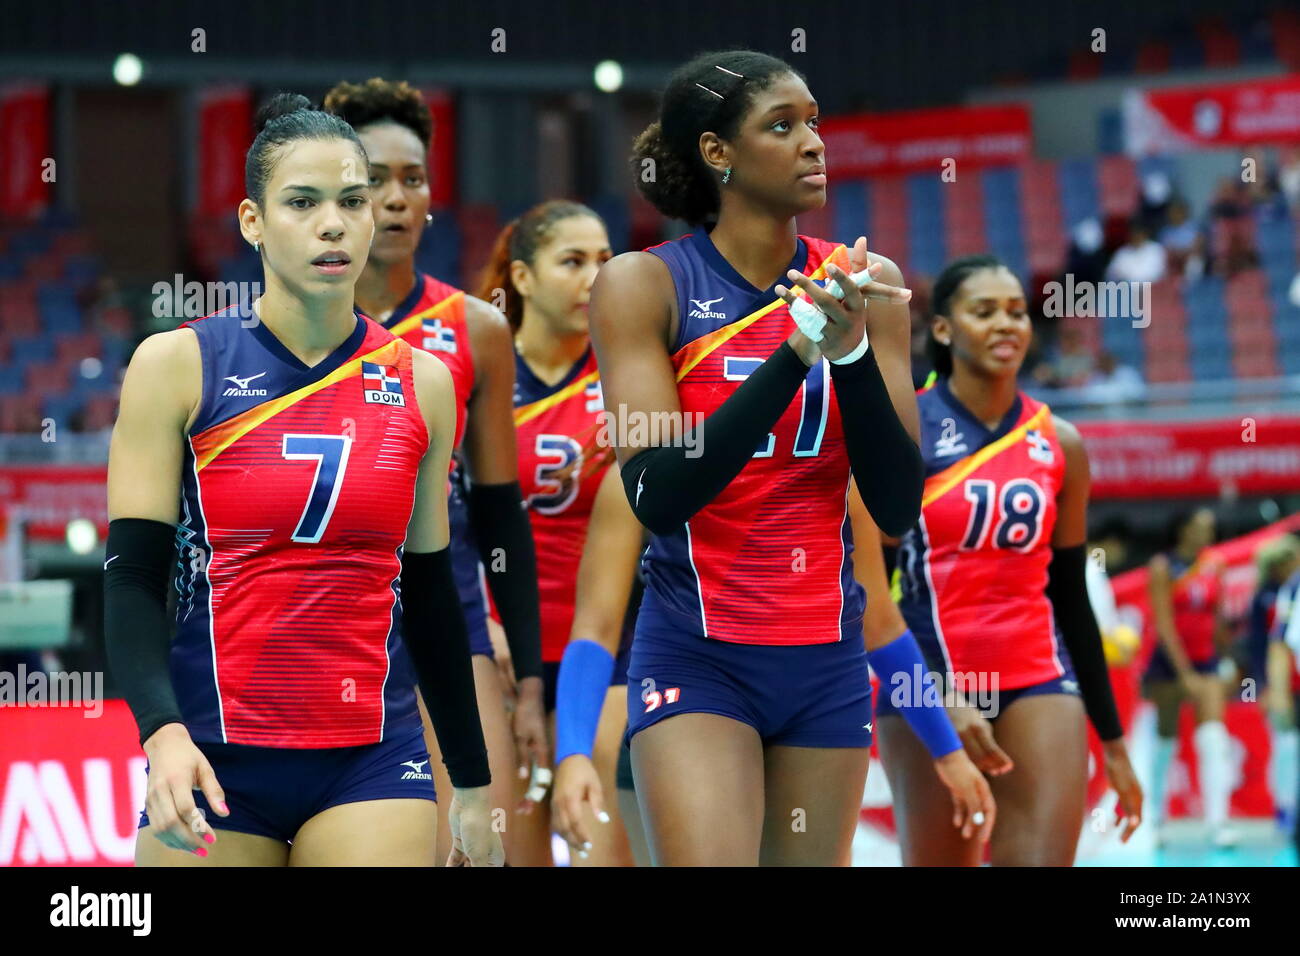 Dominican Republic Women's Volleyball Team on Women Guides